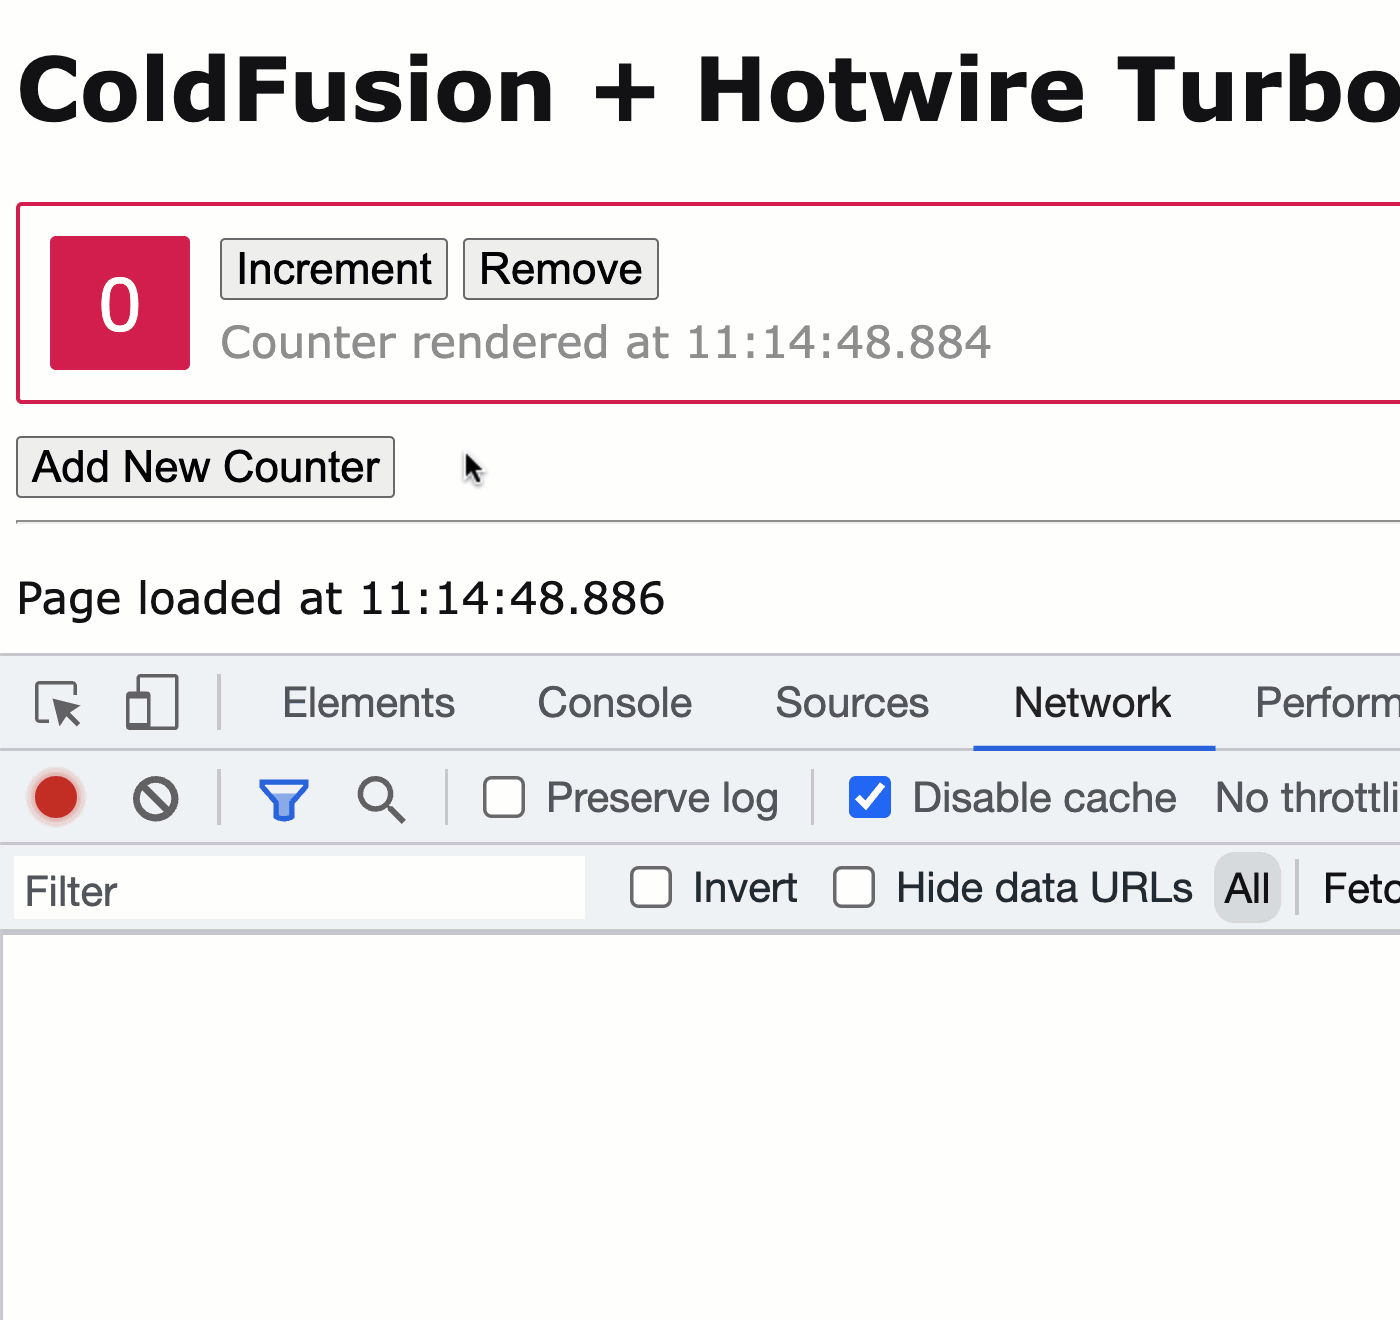 A new counter is added to the current view. And, clicking on the network activity shows a call to add.htm that results in a Turbo Stream response.